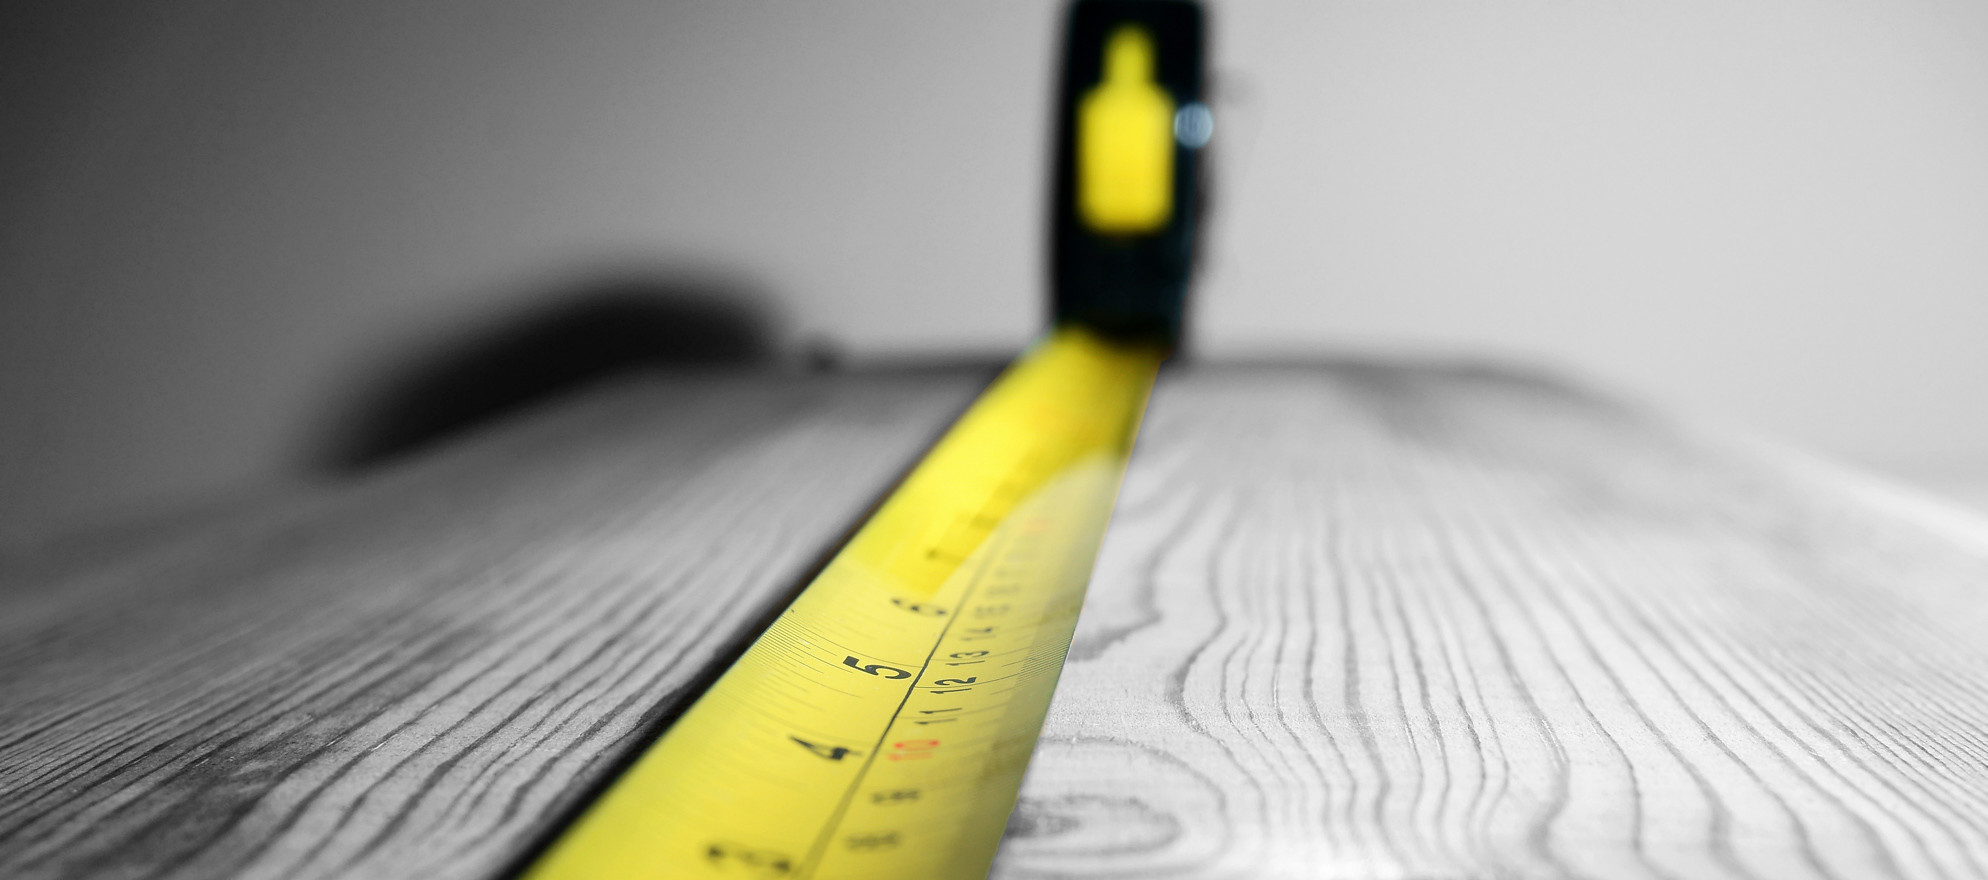 A tape measure measuring out some wood